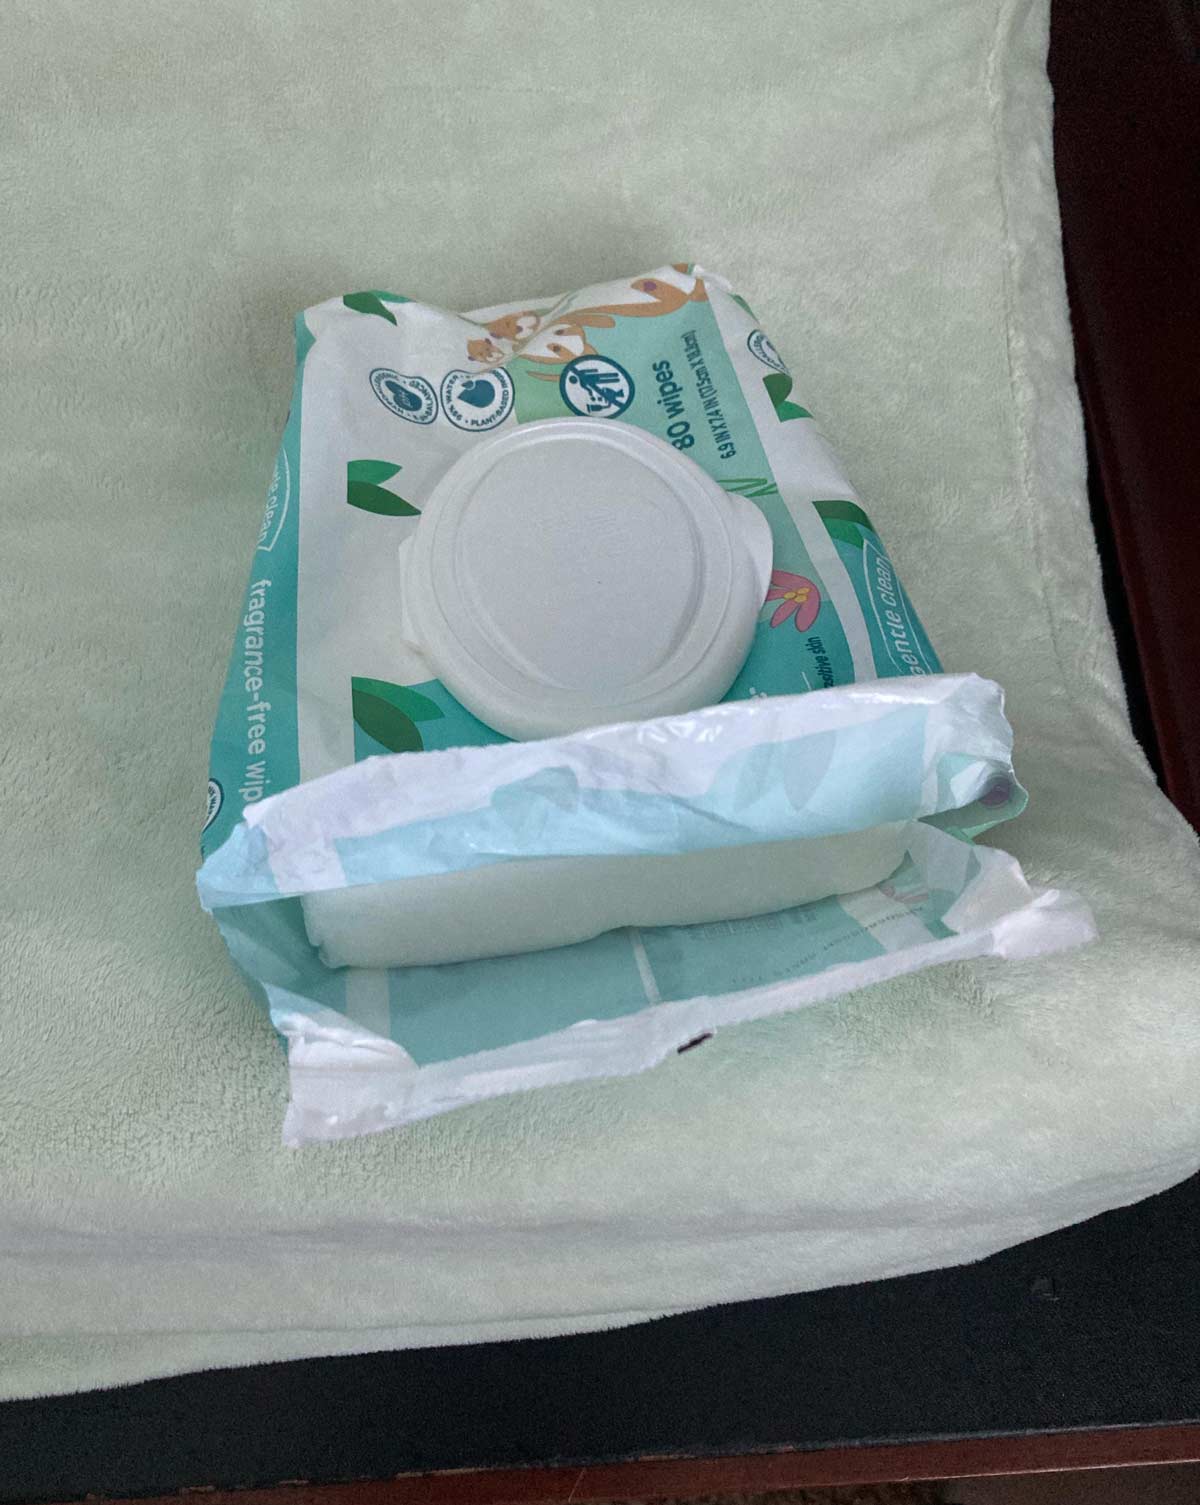 How my wife opened the baby wipes